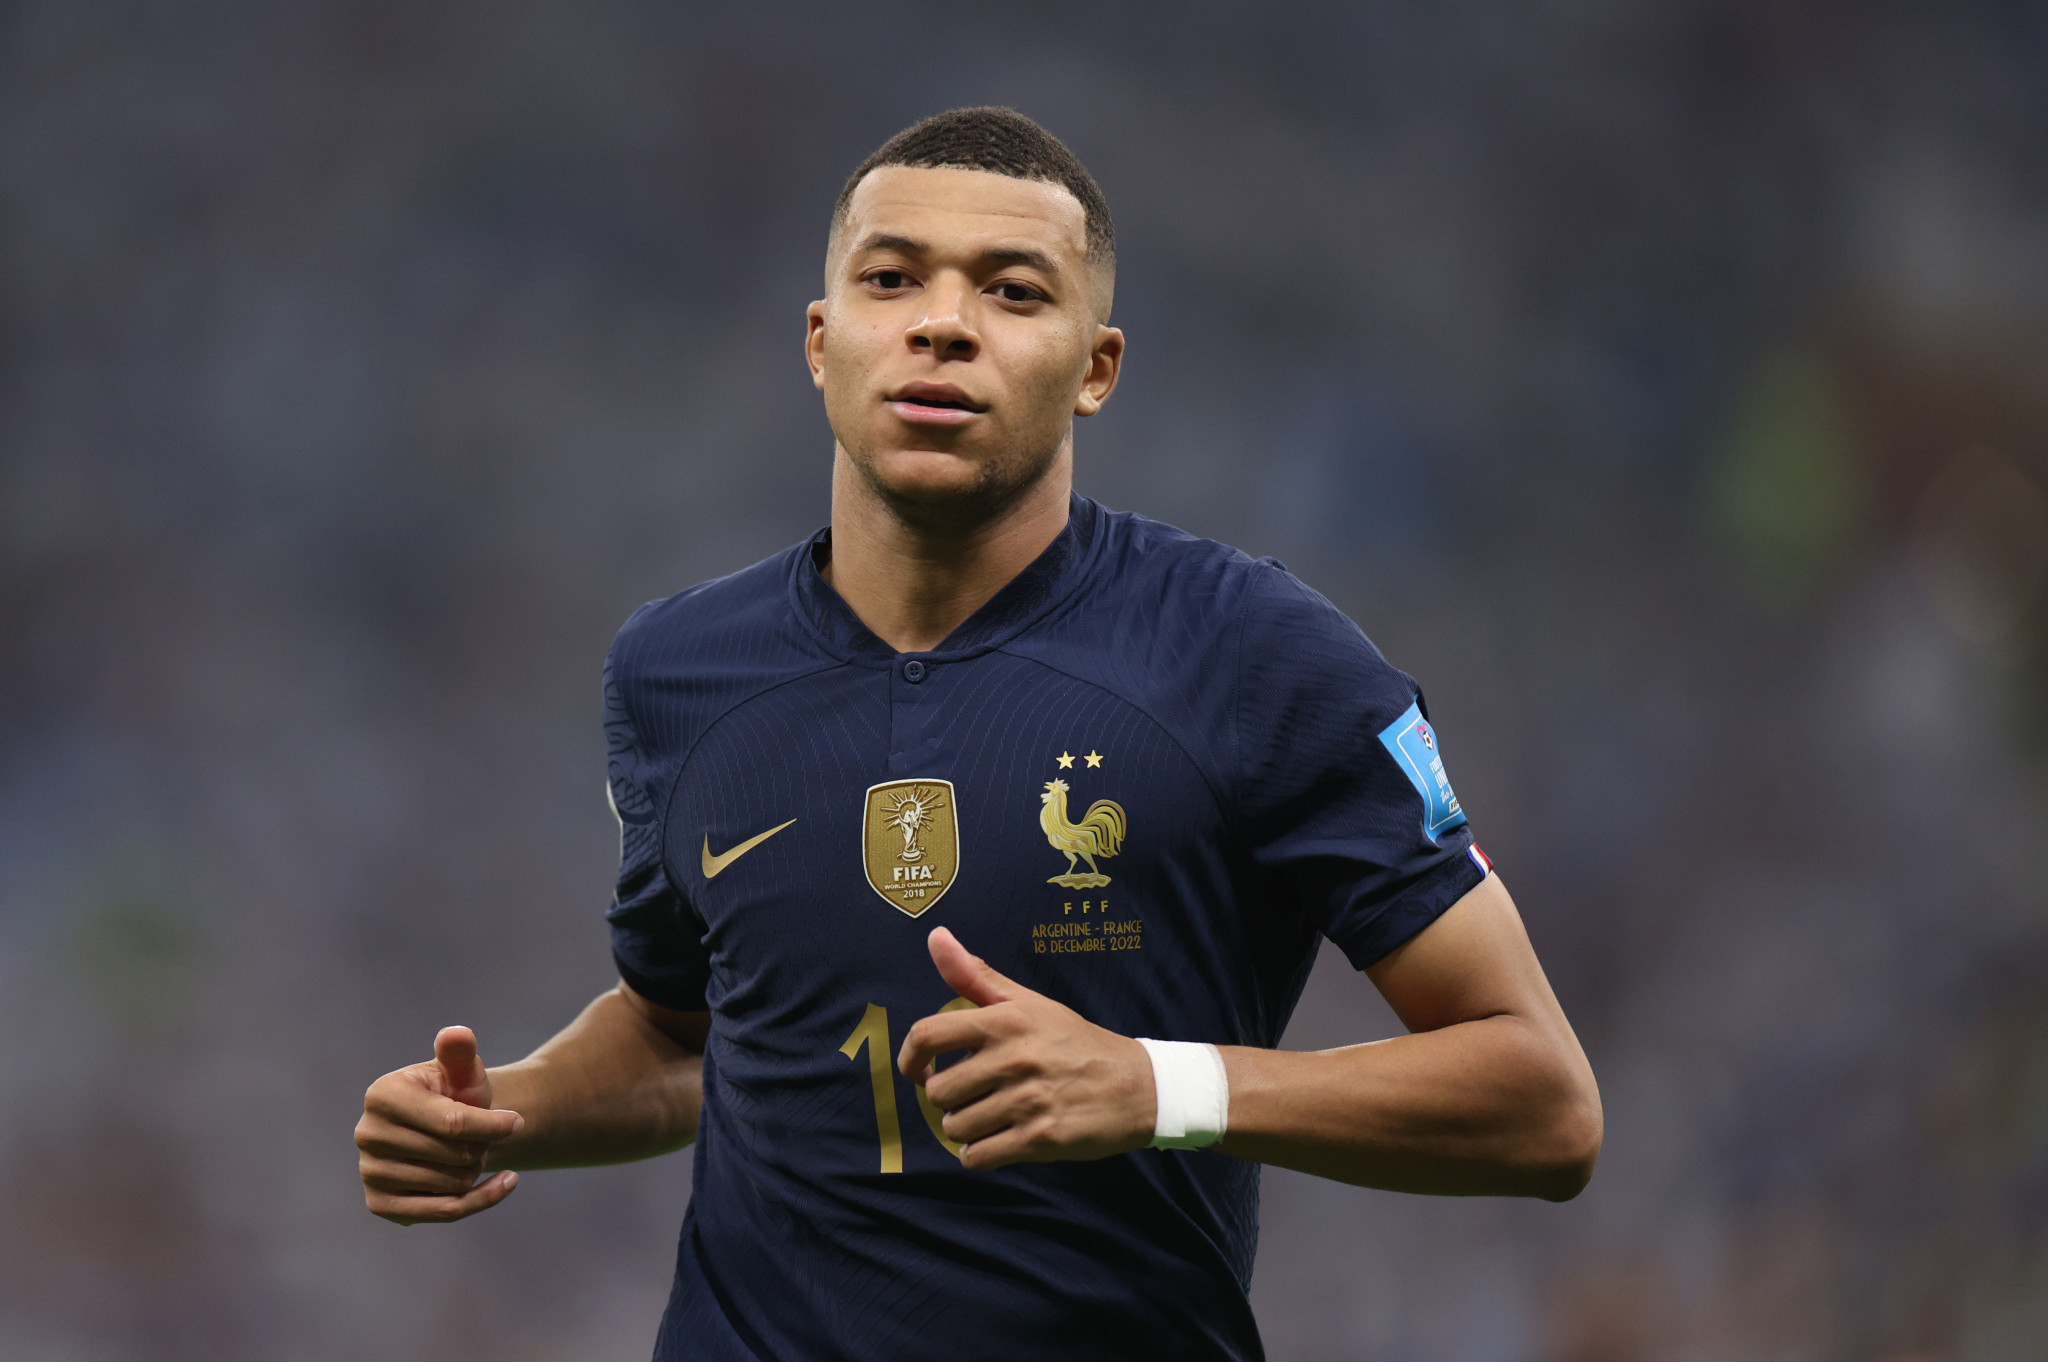 Mbappé participation at Paris 2024 set as priority by new French Football Federation President